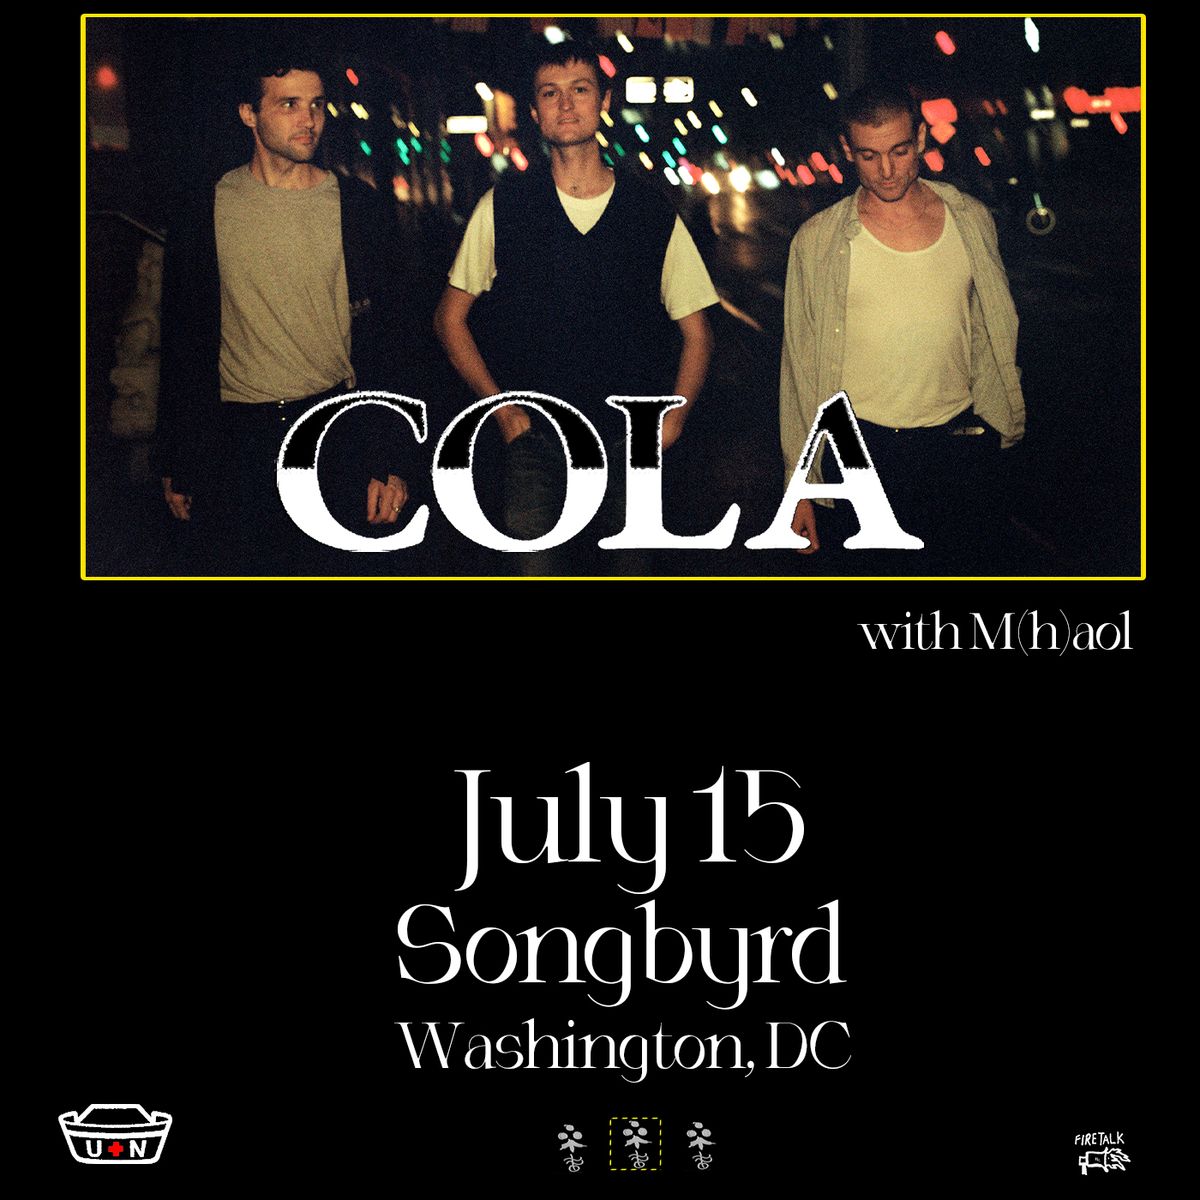 Cola - The Gloss Tour with Devon Welsh at Songbyrd DC